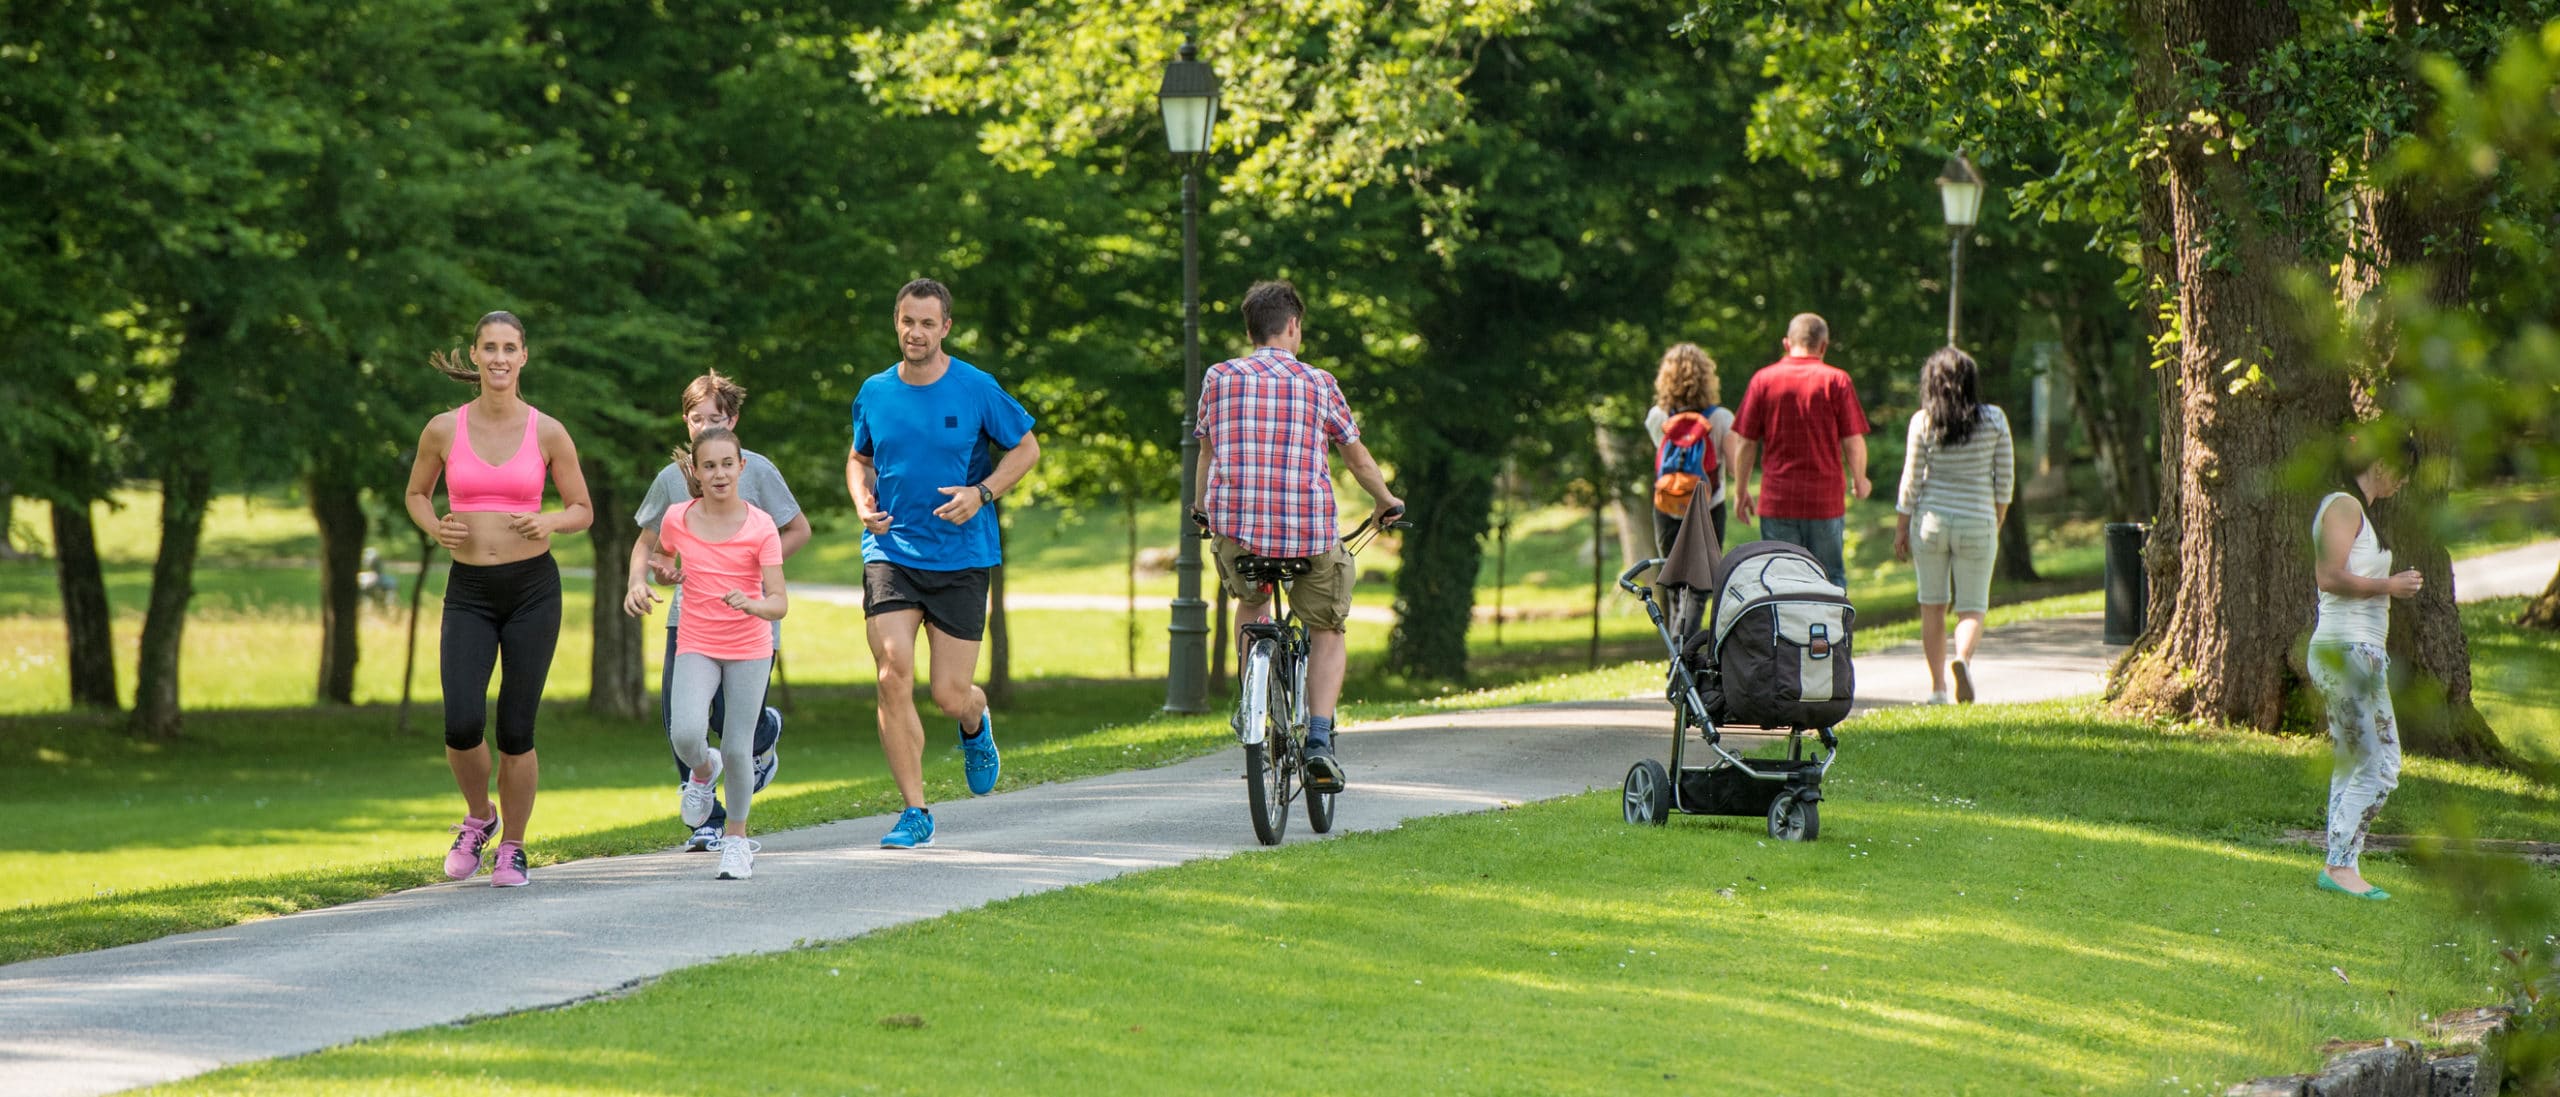 Family jogging and man cycling in park, people walking in background.